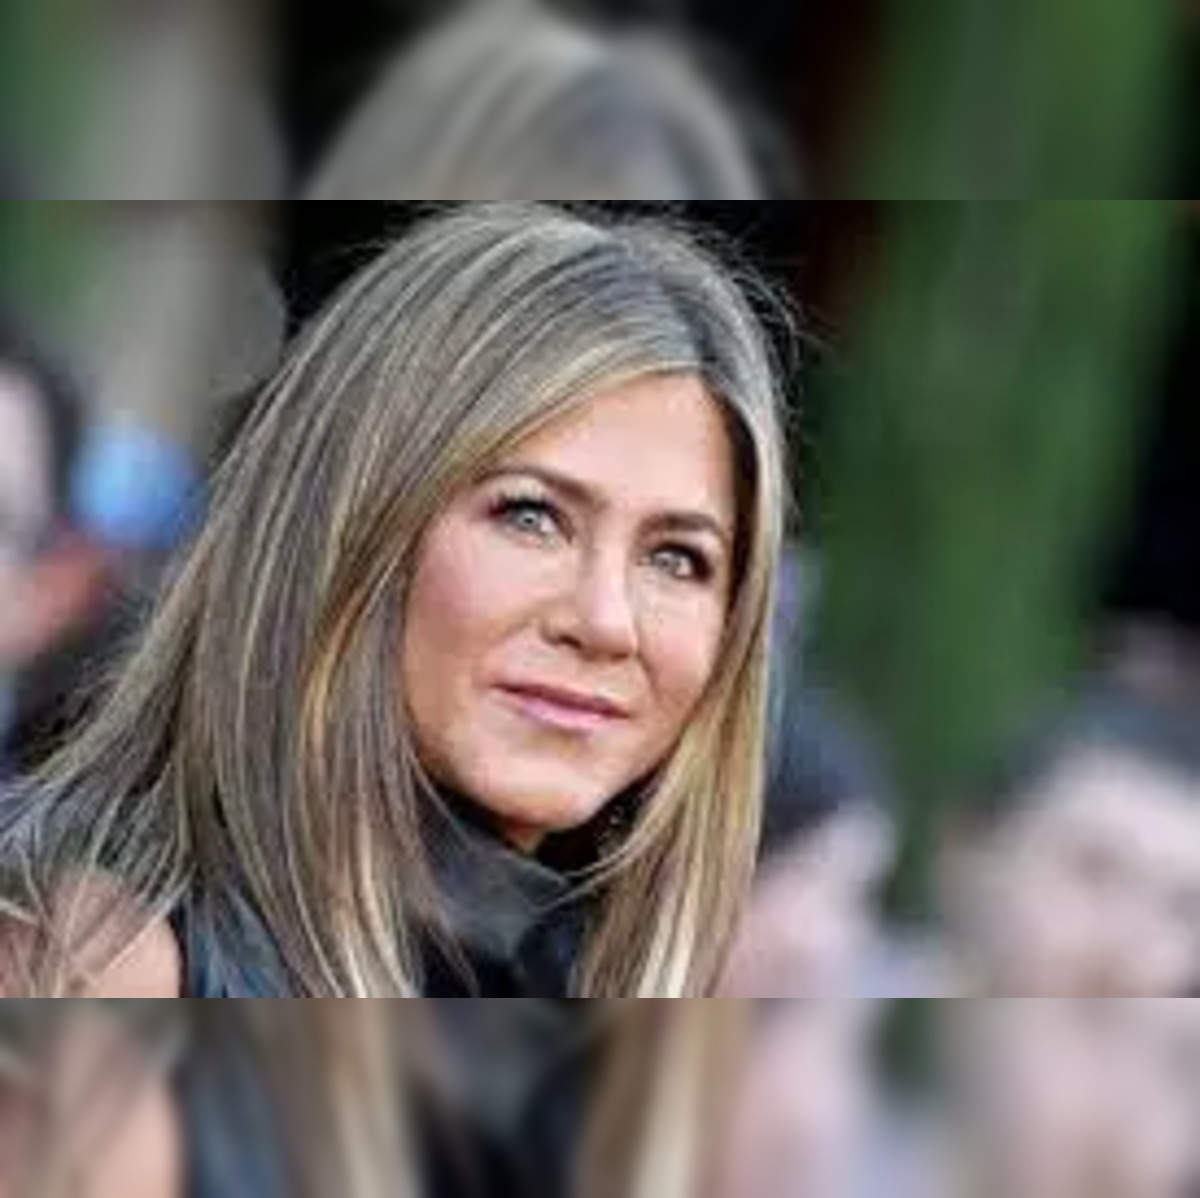 Jennifer Aniston talks about past marriages in revealing interview